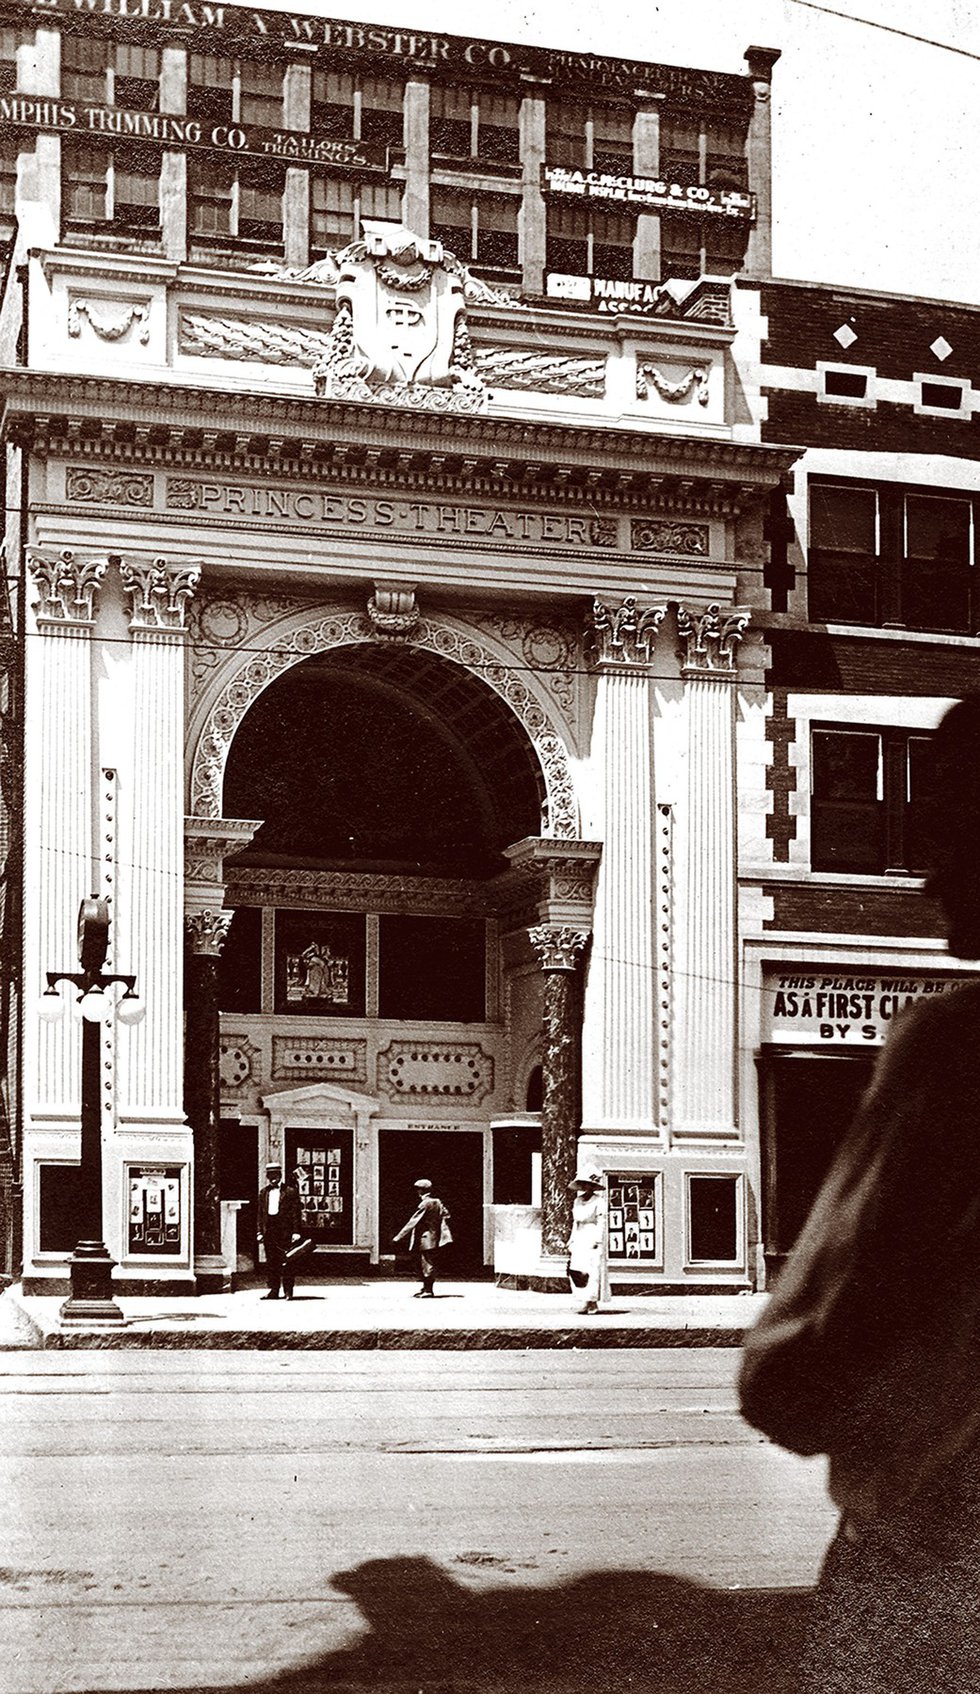 The Princess Theatre had just opened on Main Street when this photograph was taken in 1912. It was demolished in 1972.